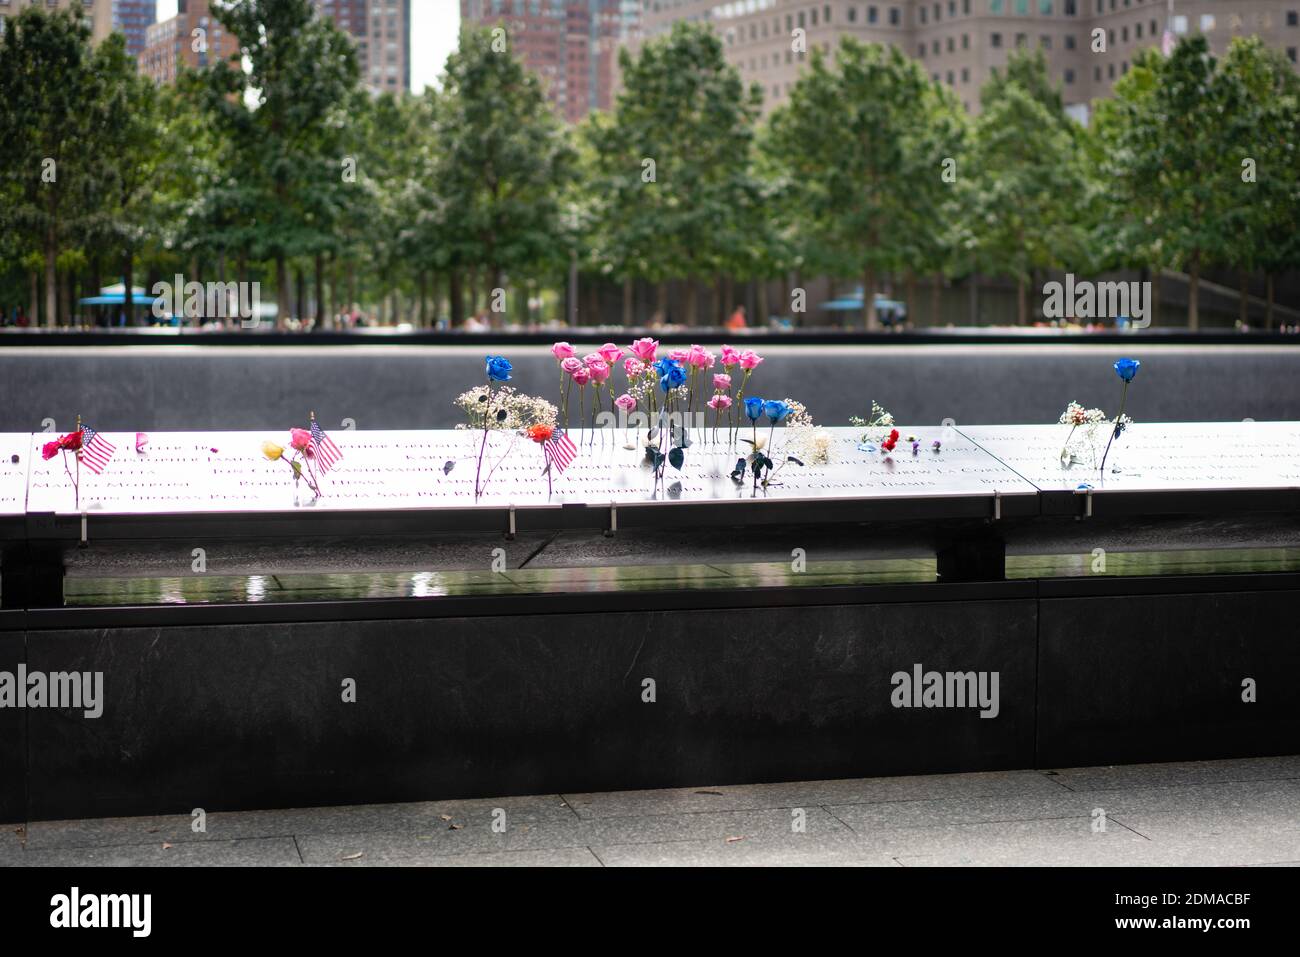 NEW YORK, UNITED STATES - Sep 12, 2020: Memorials for victims of the 9/11 terror attacks on the 2020 anniversary of the attacks Stock Photo